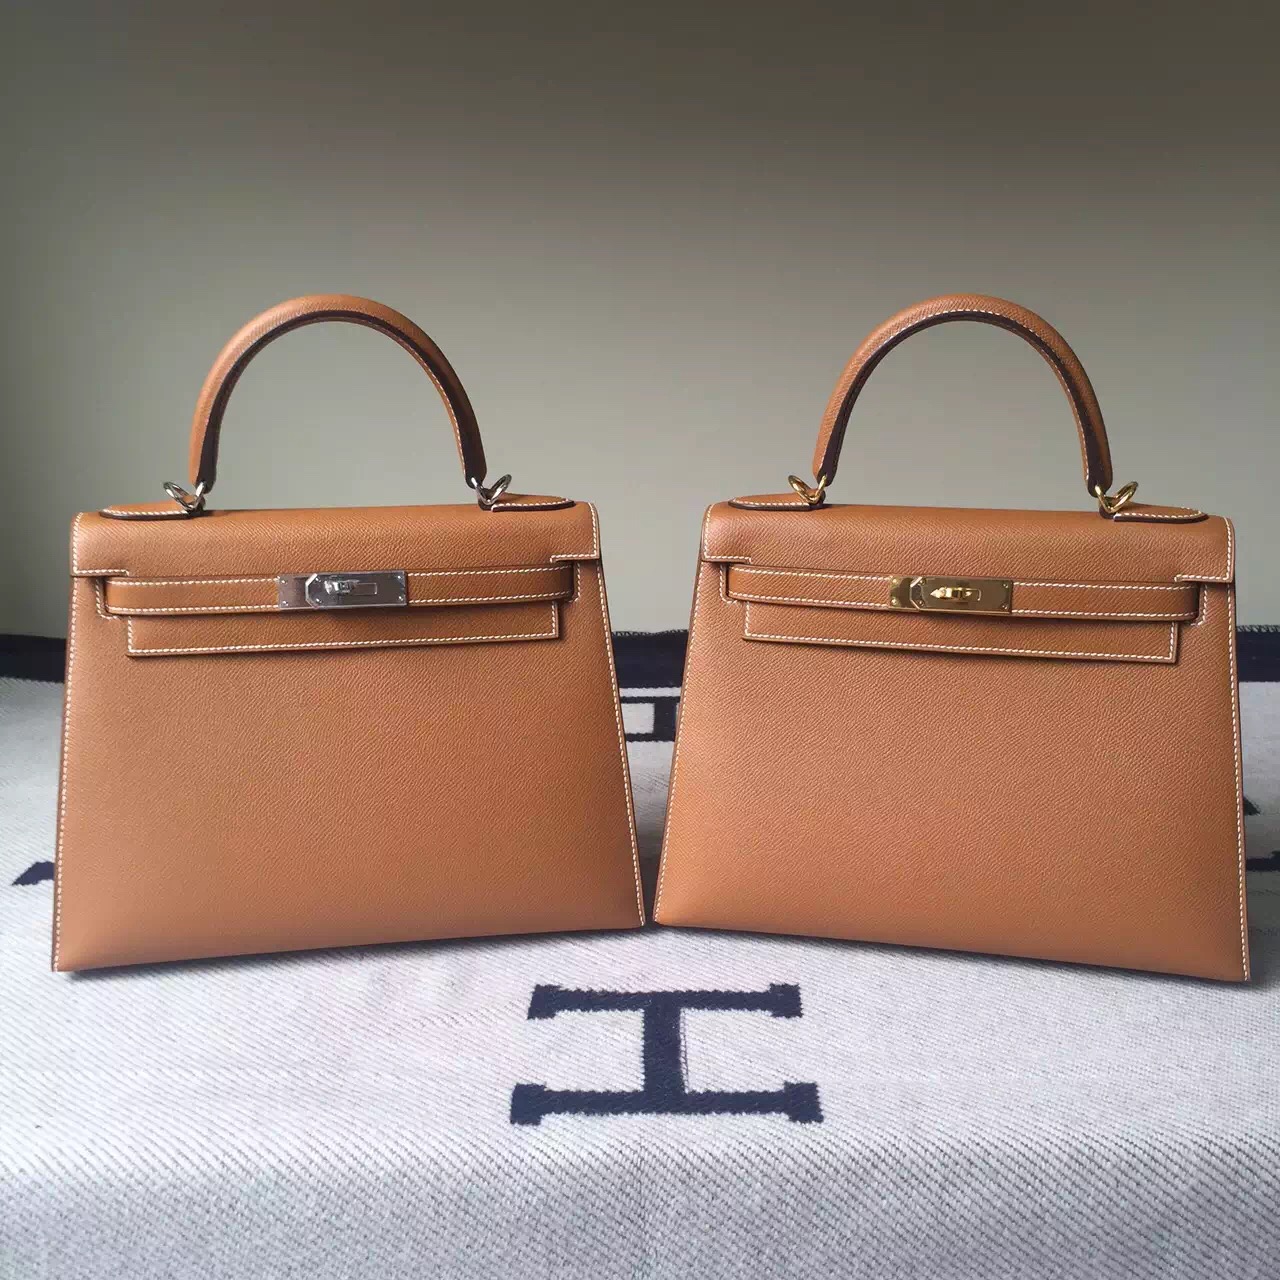 Brown Kelly Bag Archives - HEMA Leather Factory